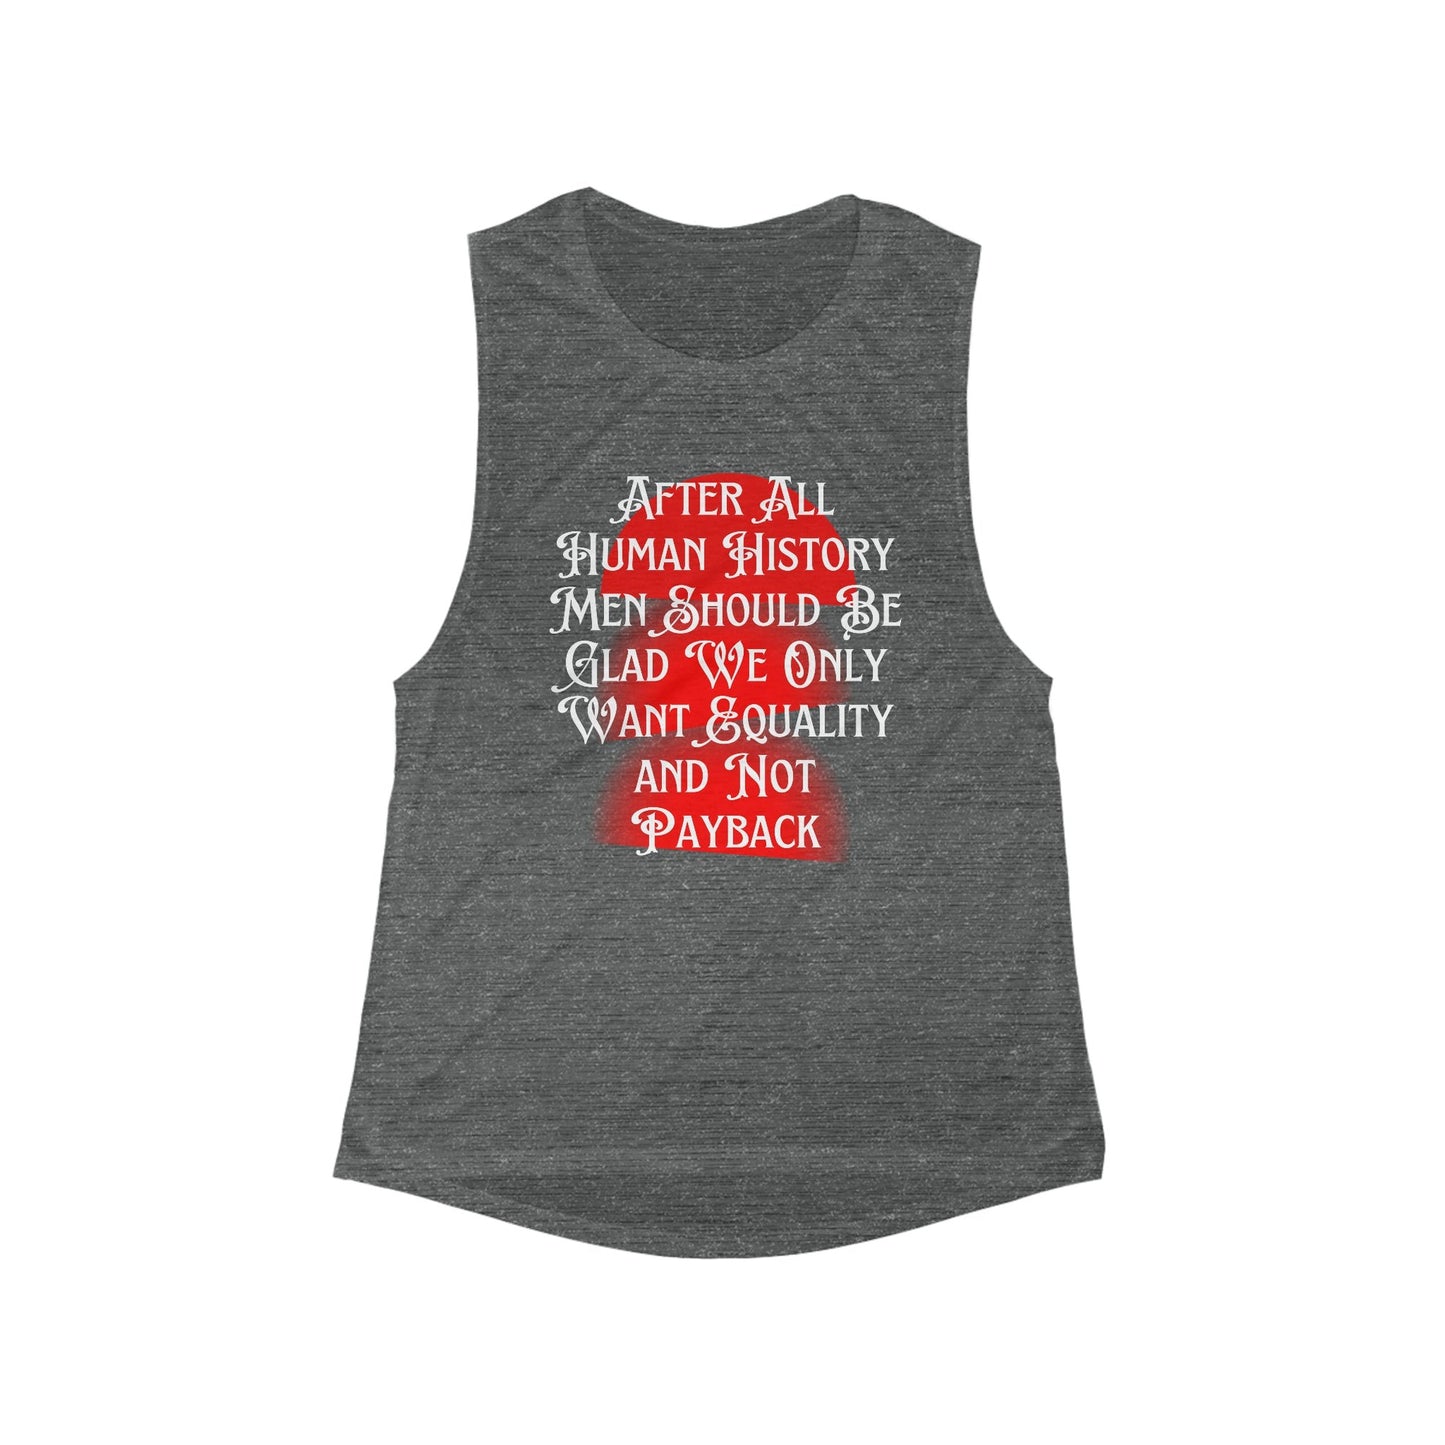 Equality Not Payback Women's Feminist Flowy Scoop Muscle Tank